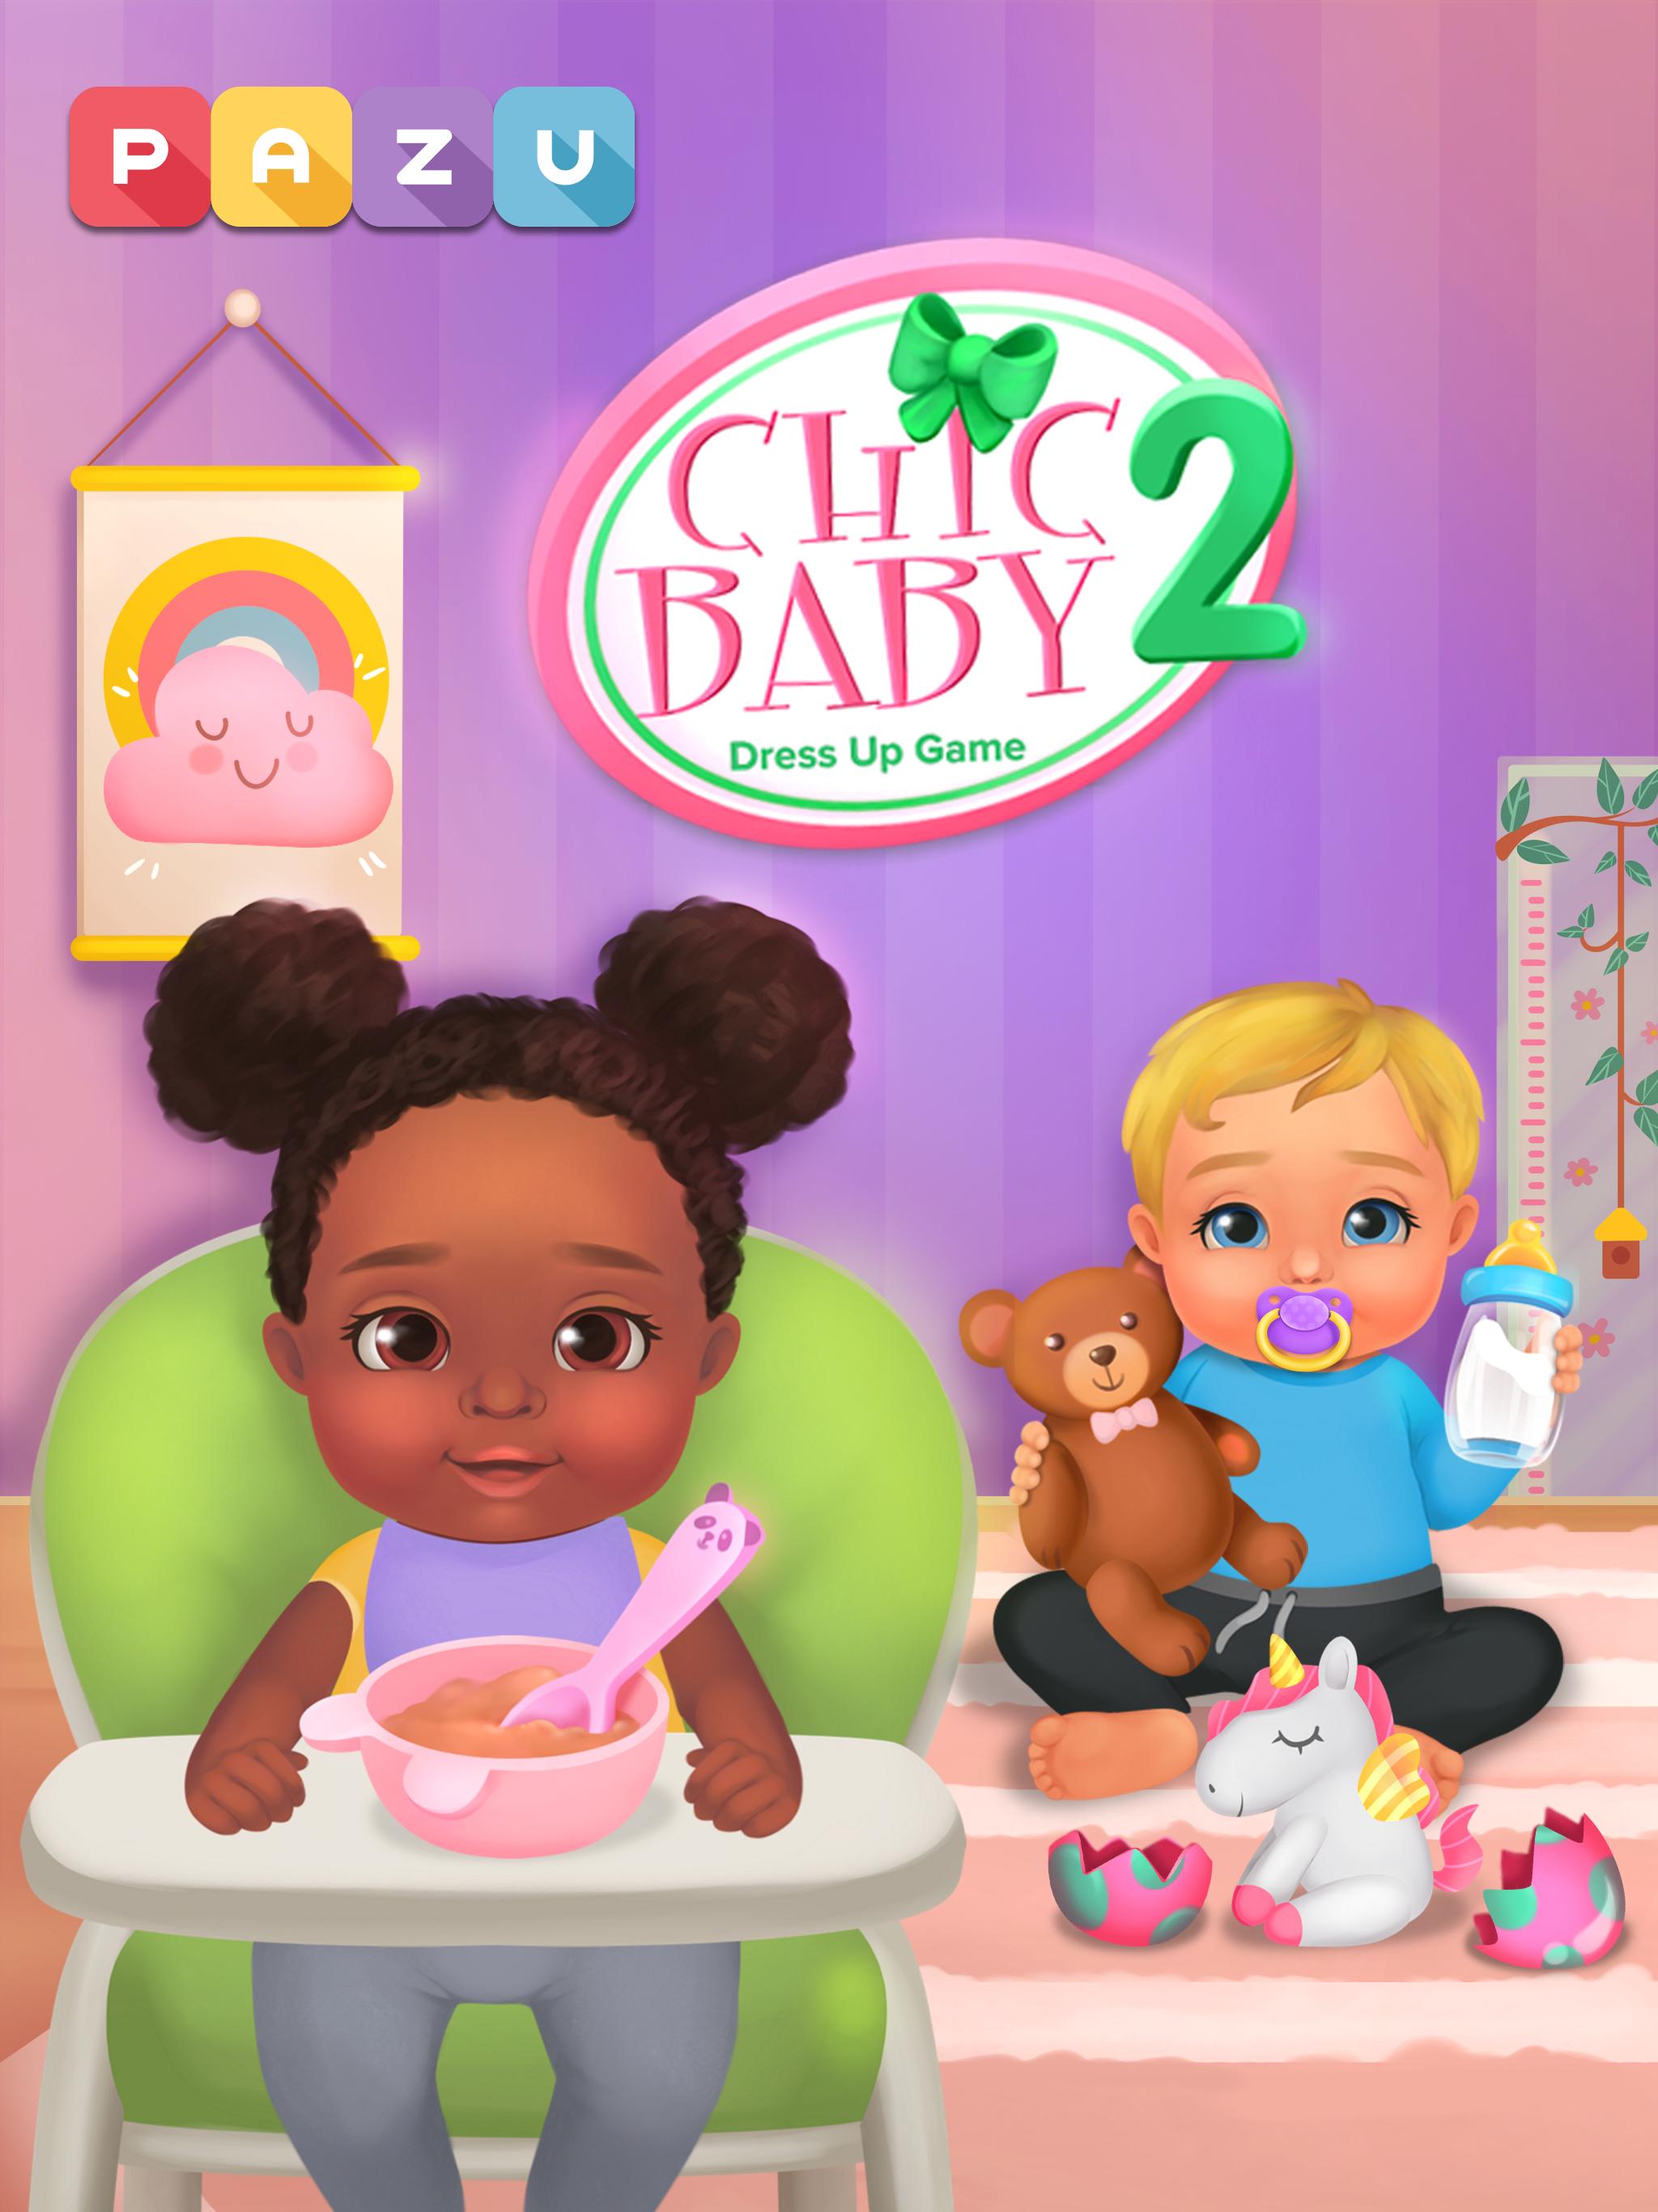 Chic Baby 2 Dress up & baby care games for kids 1.02 Screenshot 8